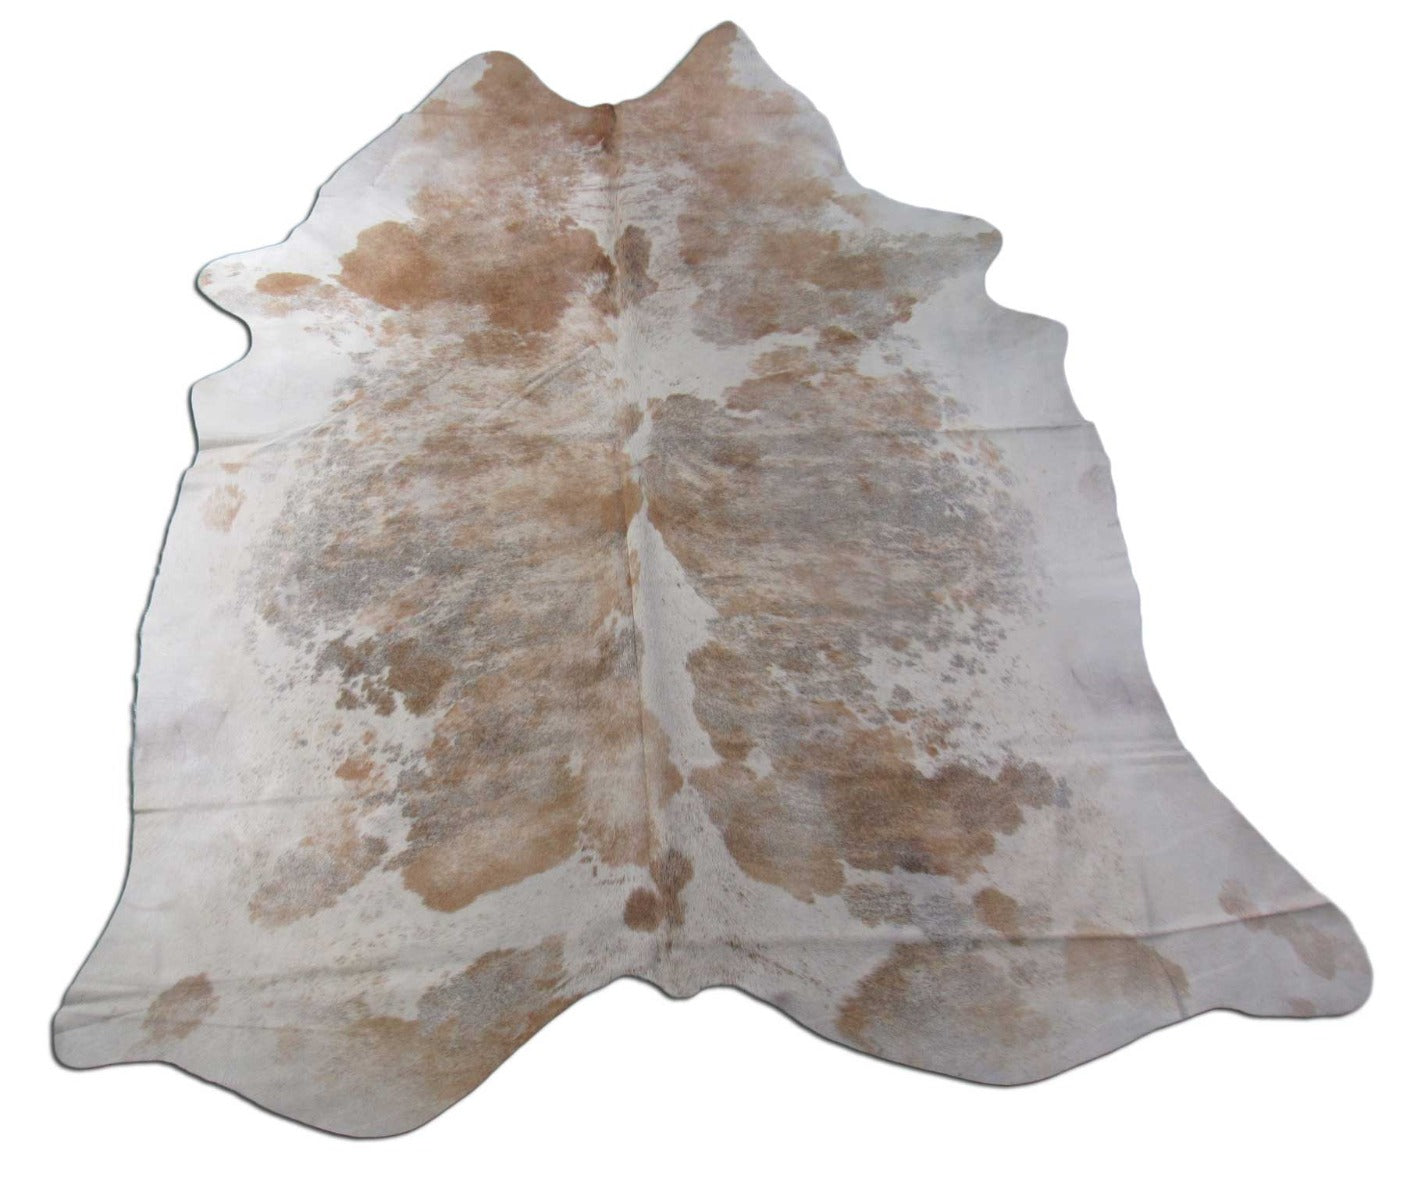 Speckled Tricolor Light Cowhide Rug - Size: 8x6.5 feet O-1062